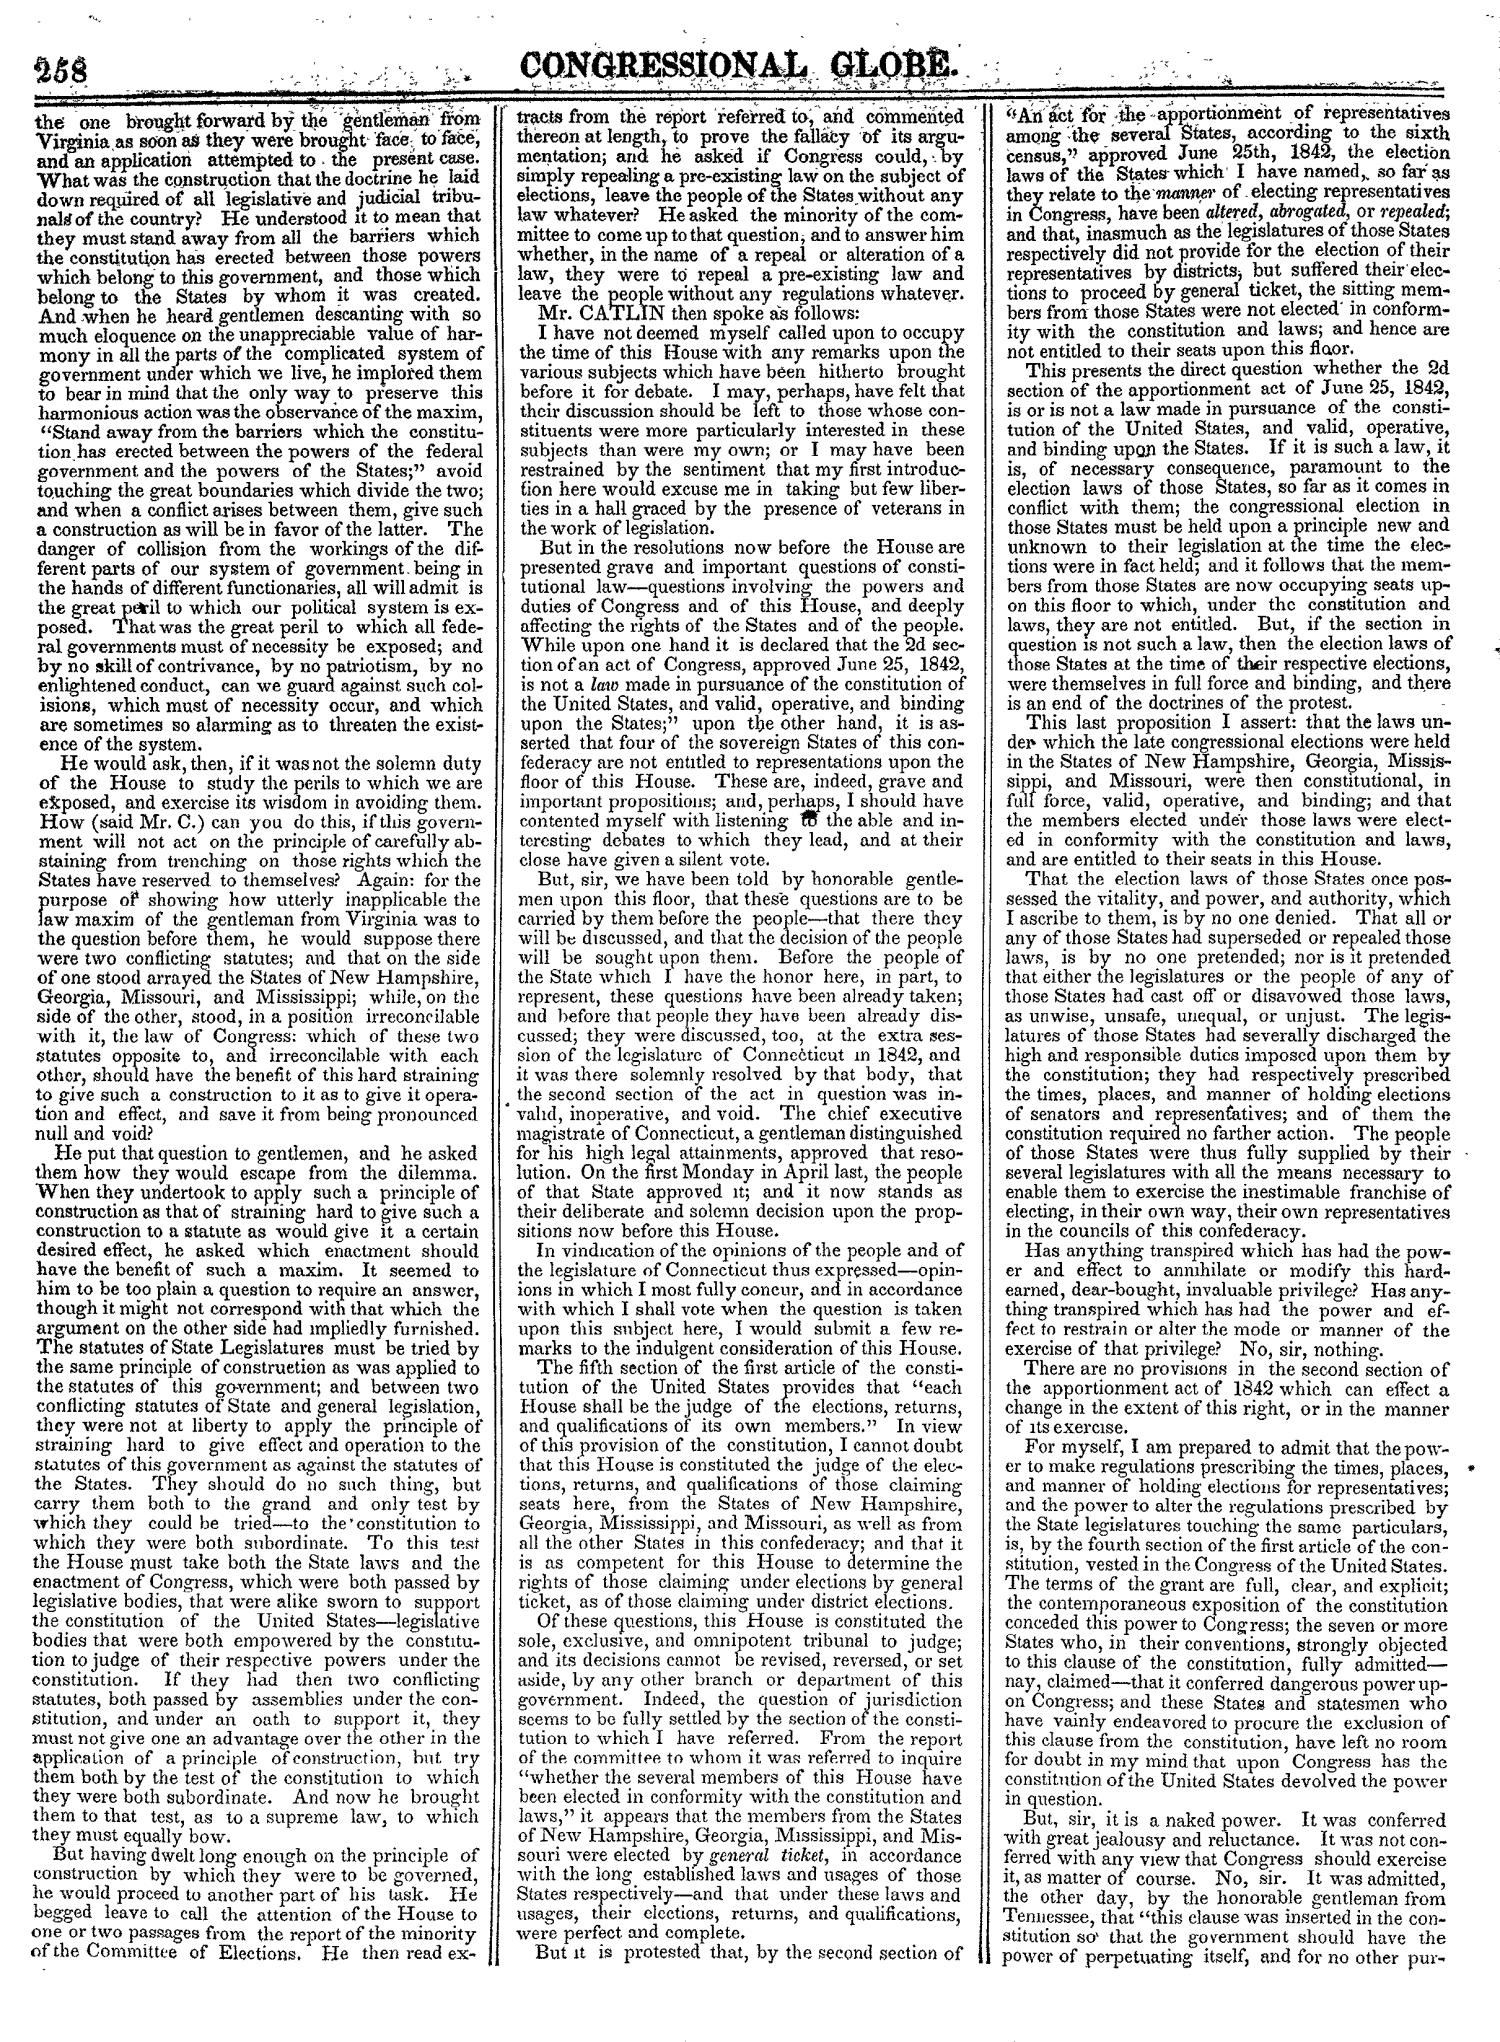 The Congressional Globe, Volume 13, Part 1: Twenty-Eighth Congress, First Session
                                                
                                                    258
                                                